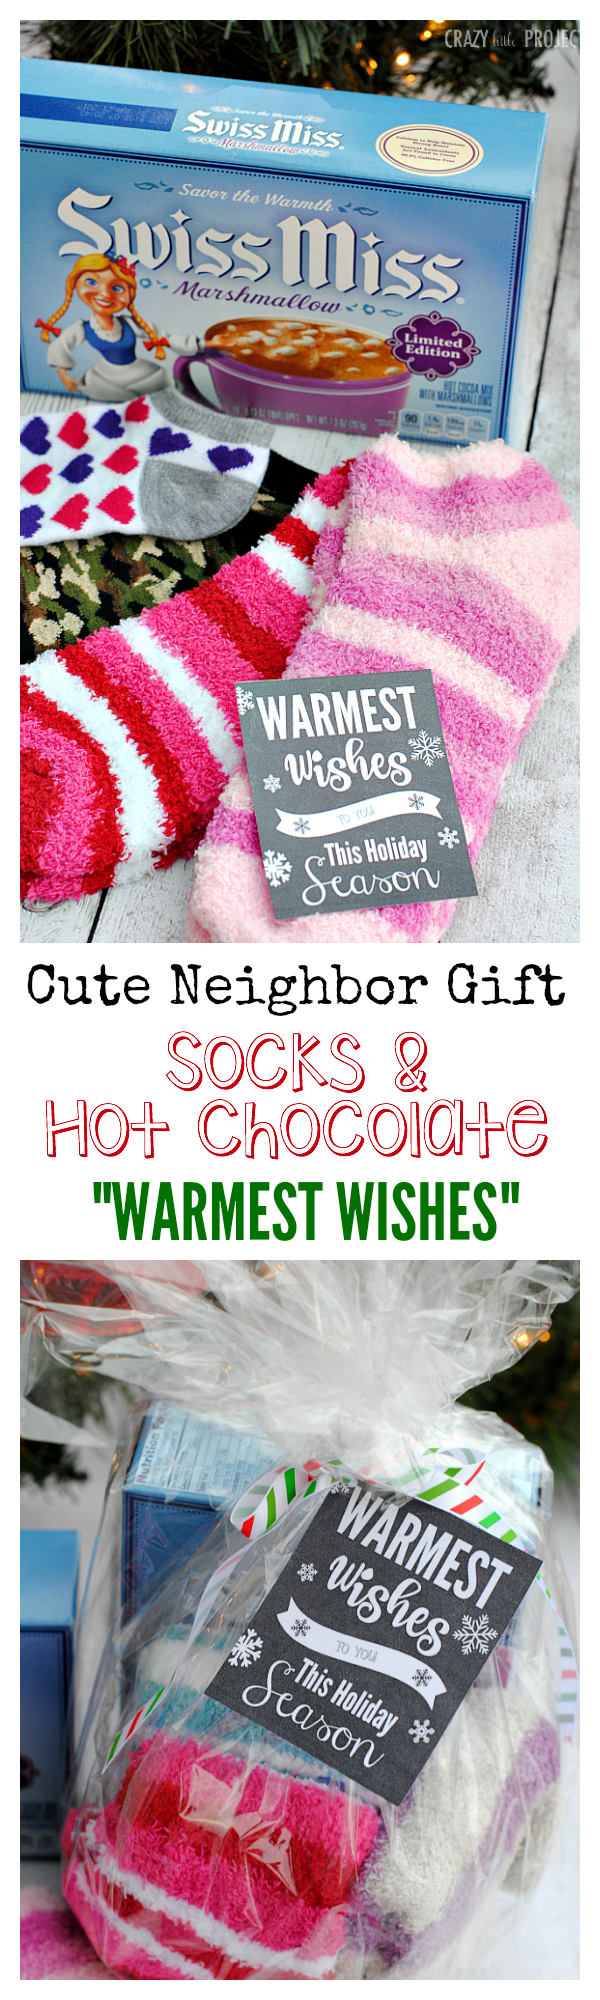 Cute Neighbor Gift Idea! Warm fuzzy socks and hot chocolate with "Warmest Wishes" tag